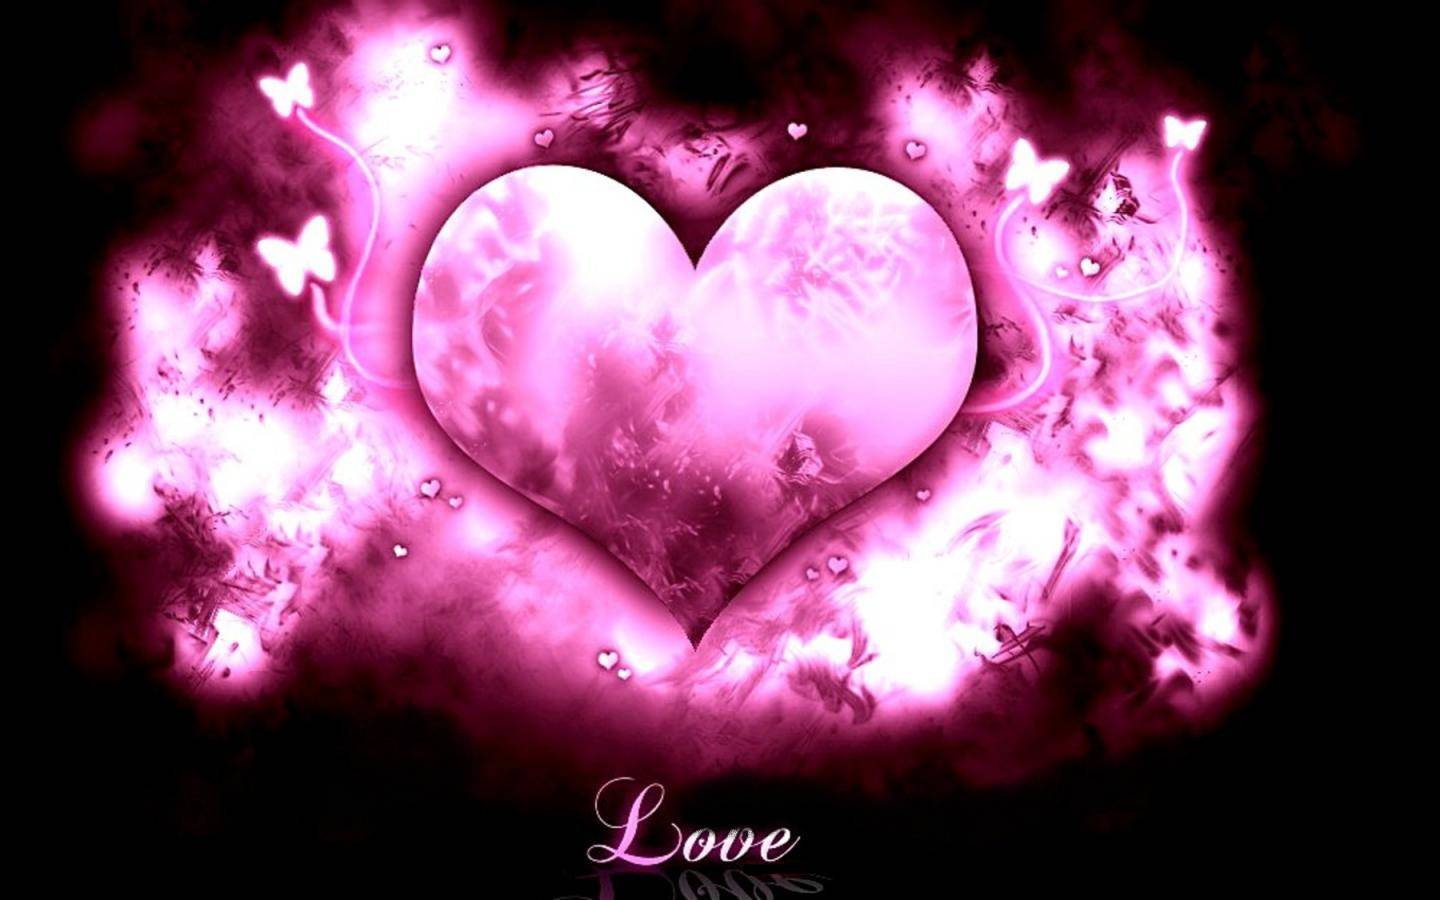 Love wallpaper wallpapers for free download about wallpapers.